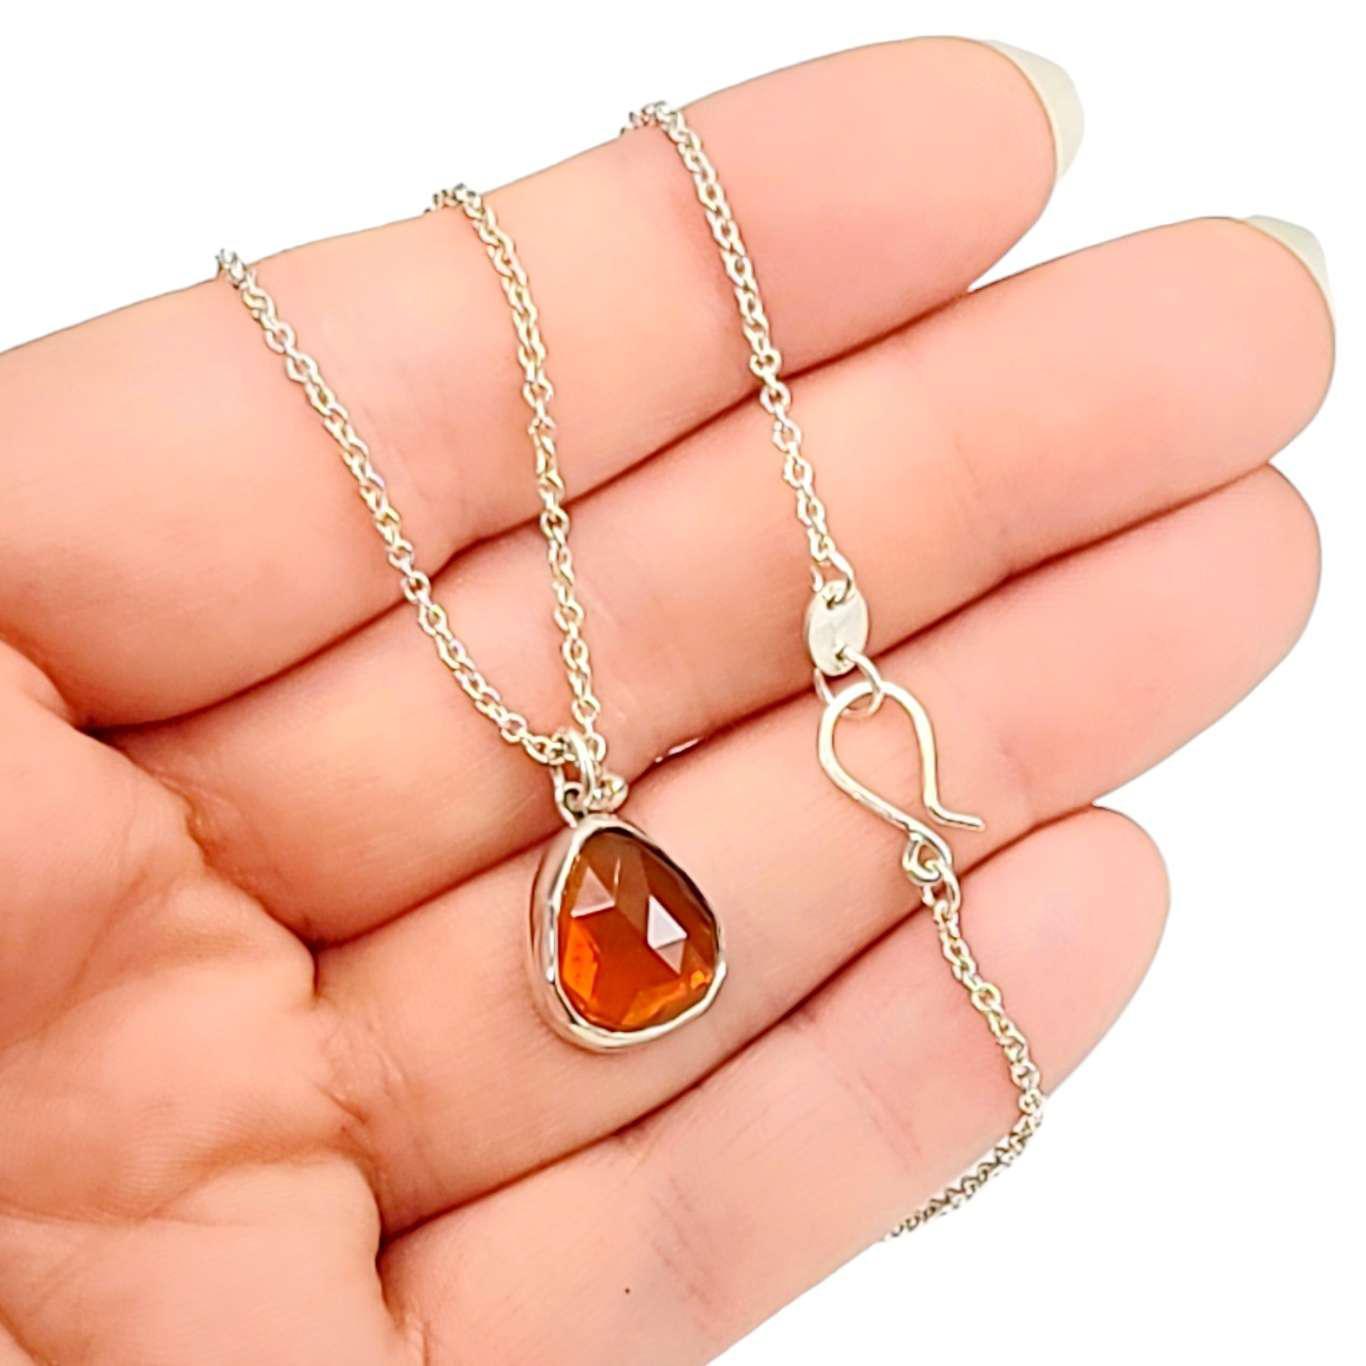 Necklace - Theia in Fire Opal and Sterling Silver with Diamond by Corey Egan